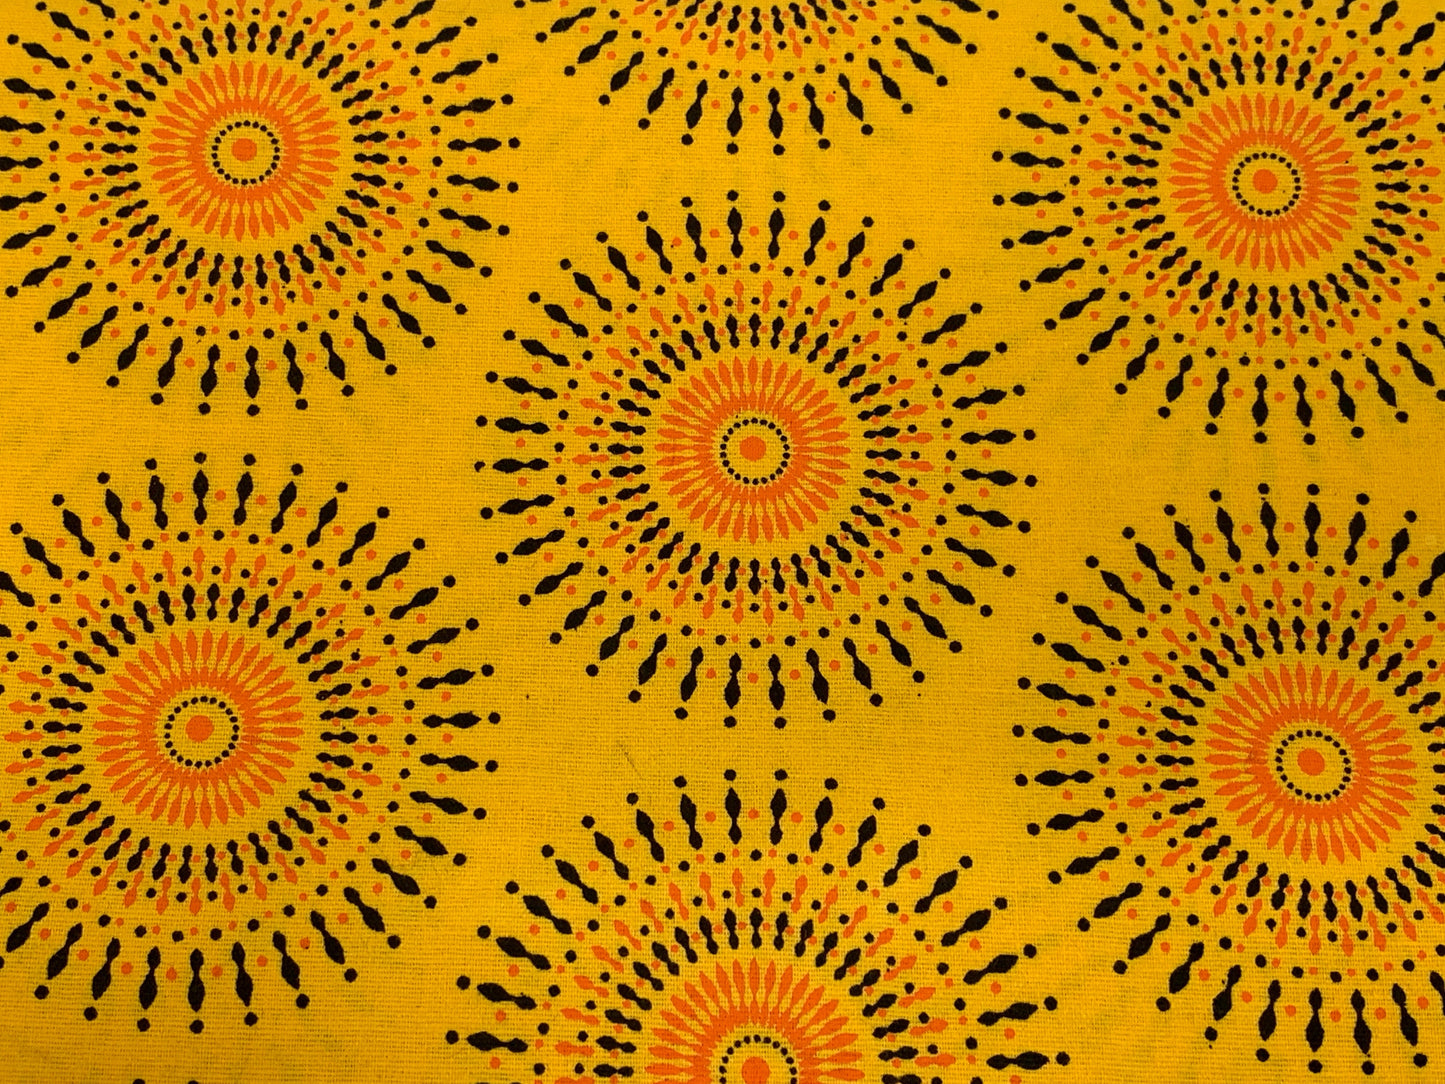 Yellow South African Shweshwe Fabric by the YARD. DaGama 3 Cats Large Yellow Sunburst. Cotton Print Fabric for Quilting, Apparel, Home Décor